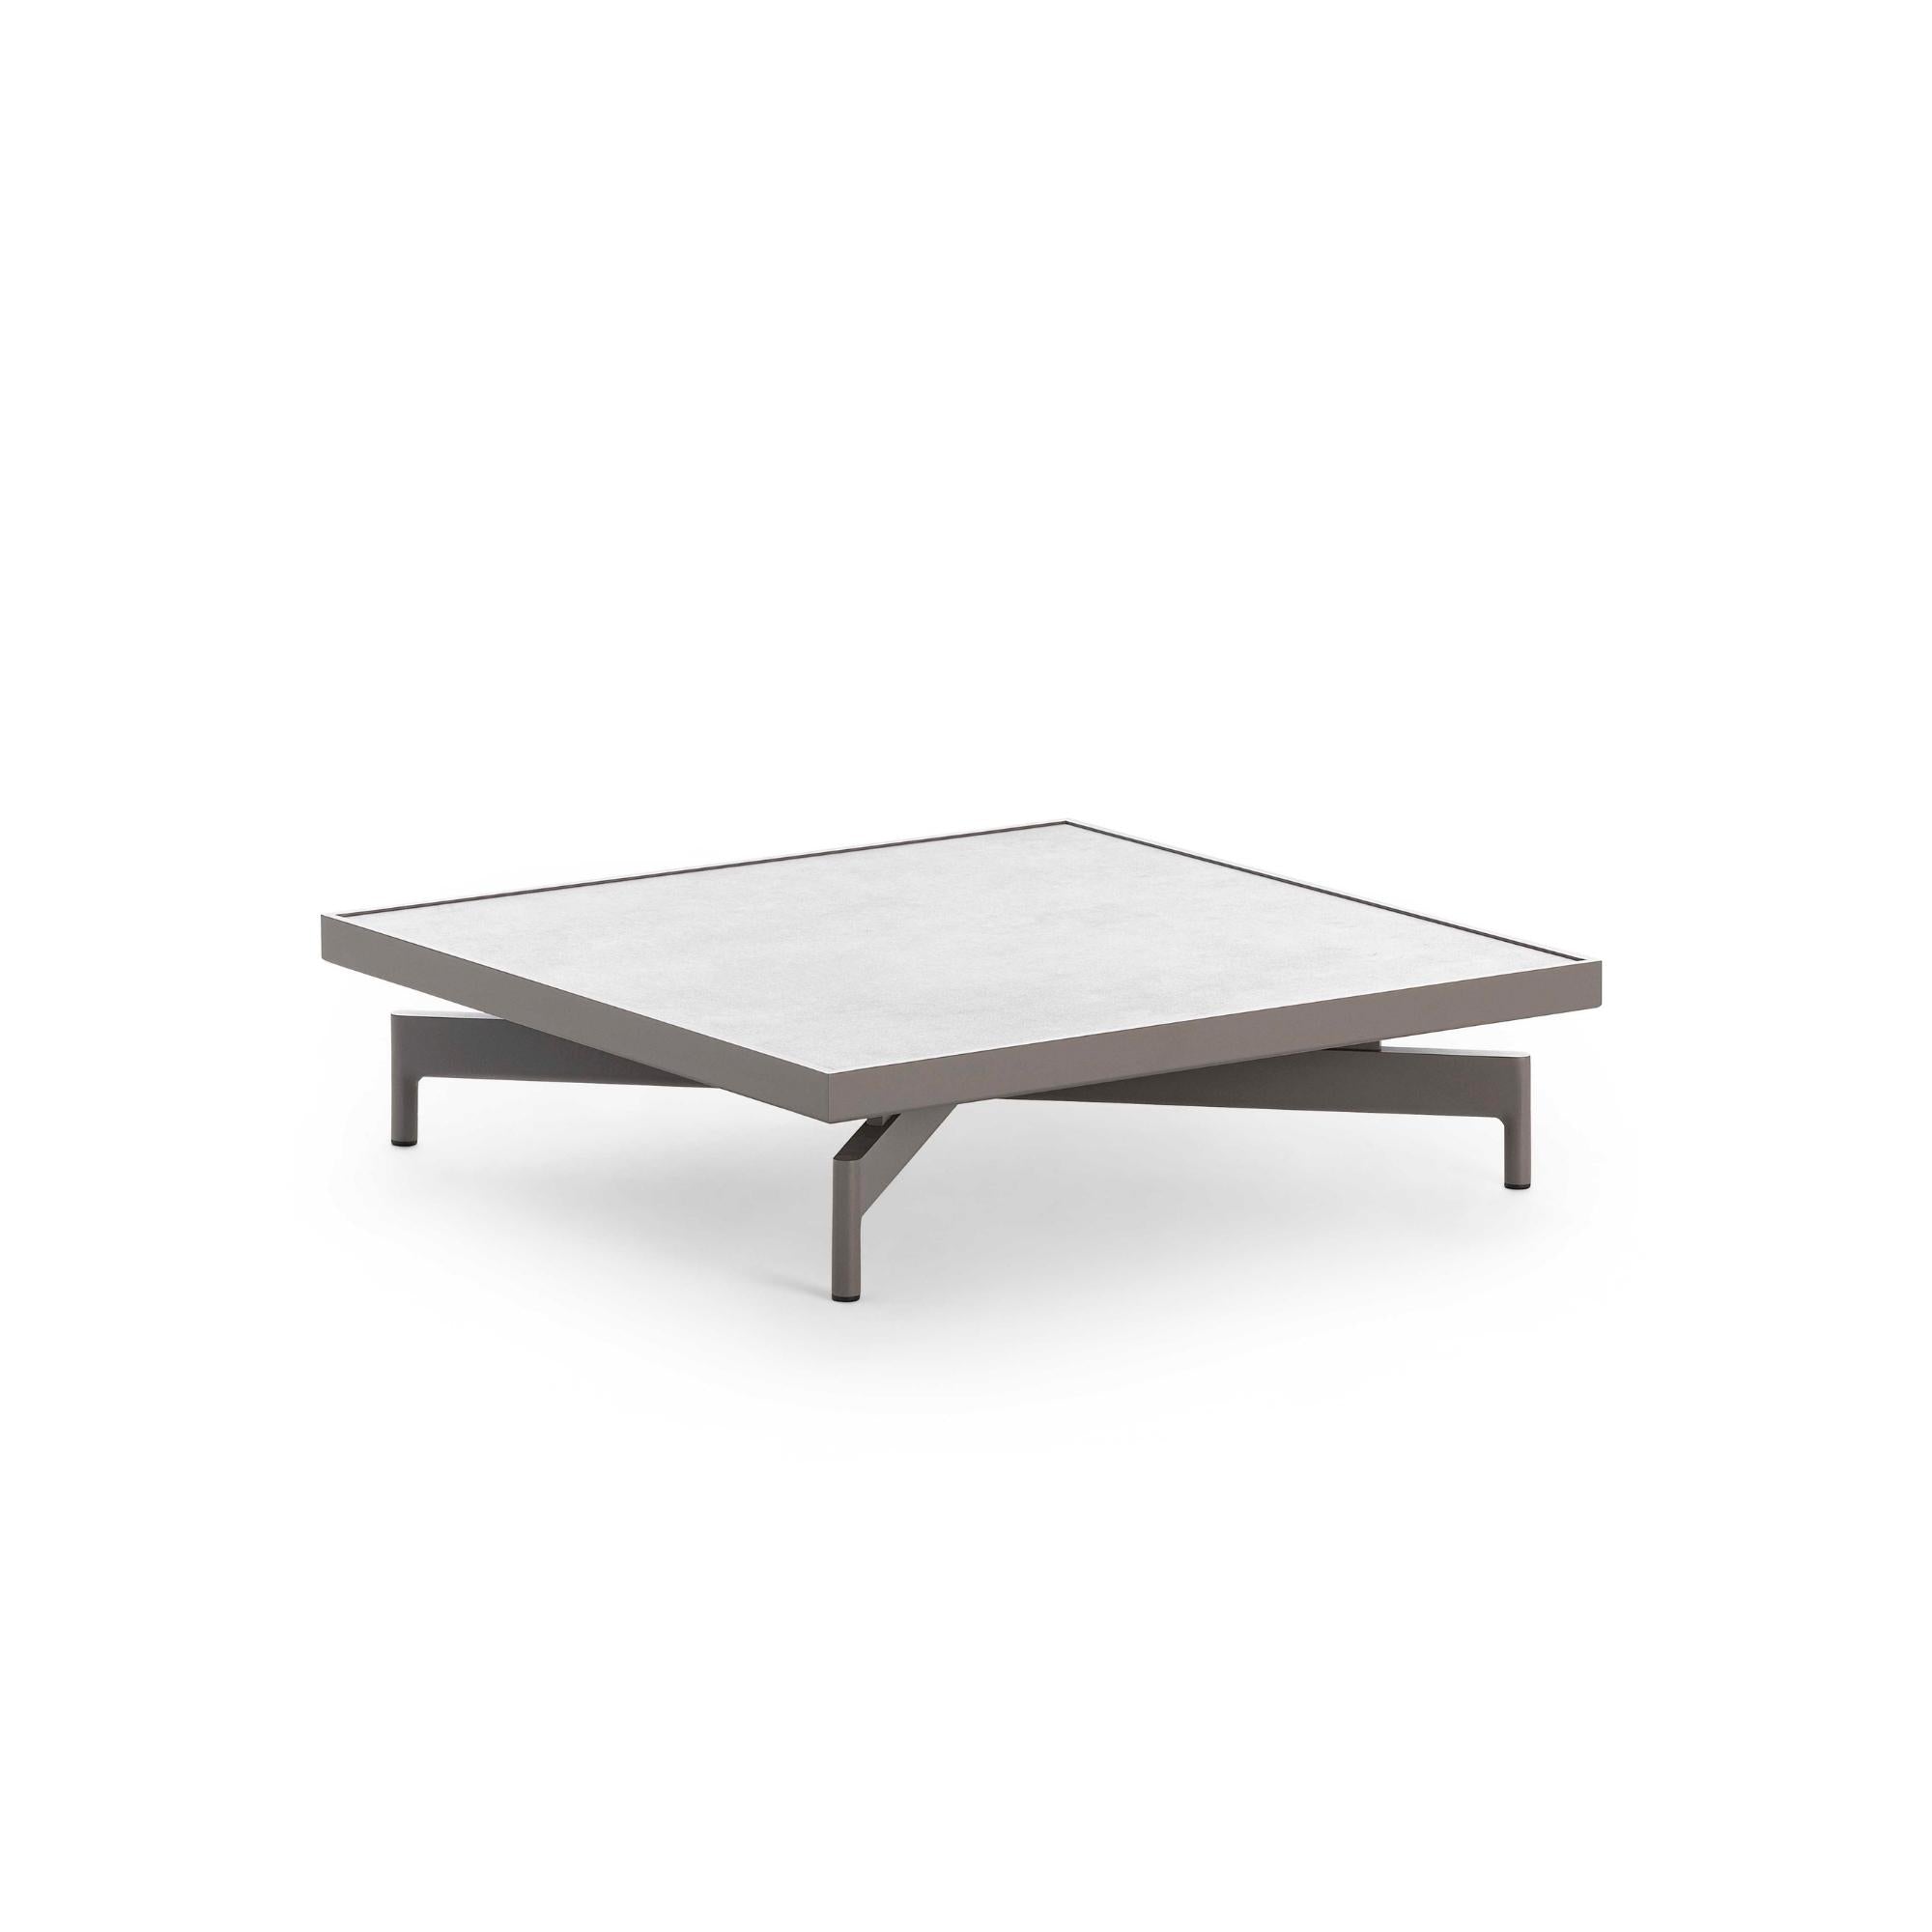 Onde Square Coffee Table